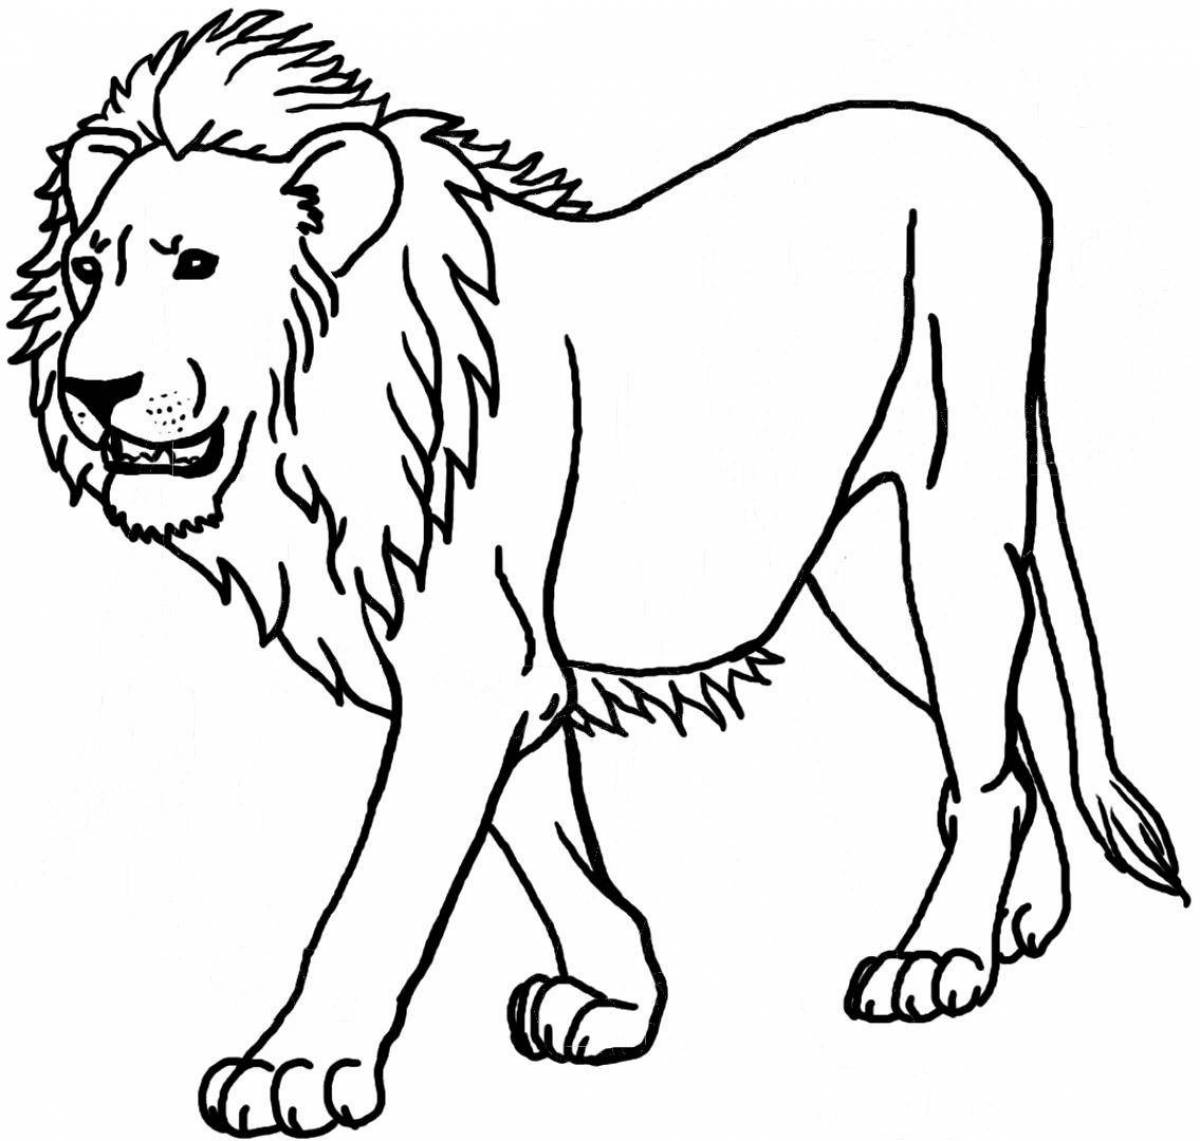 Fancy animal coloring pages for kids 10-12 years old